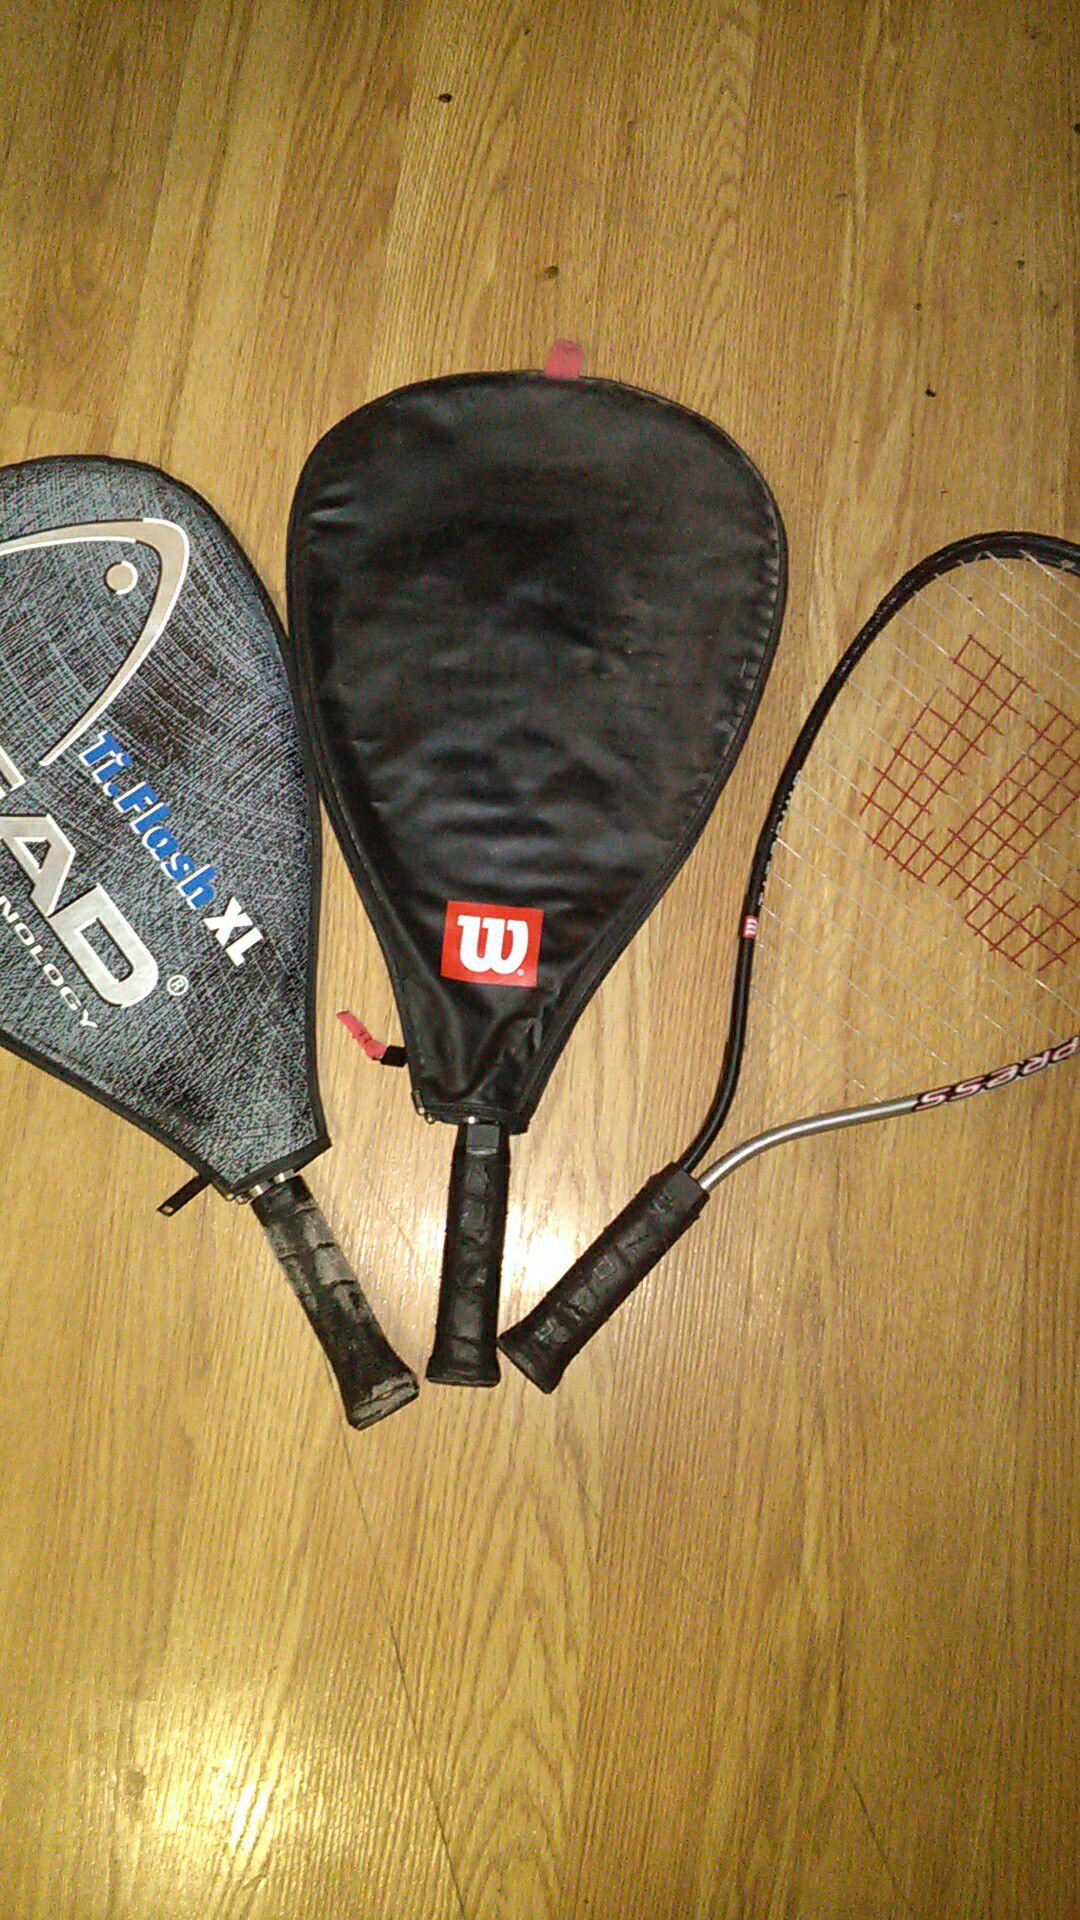 Tennis rackets with cases